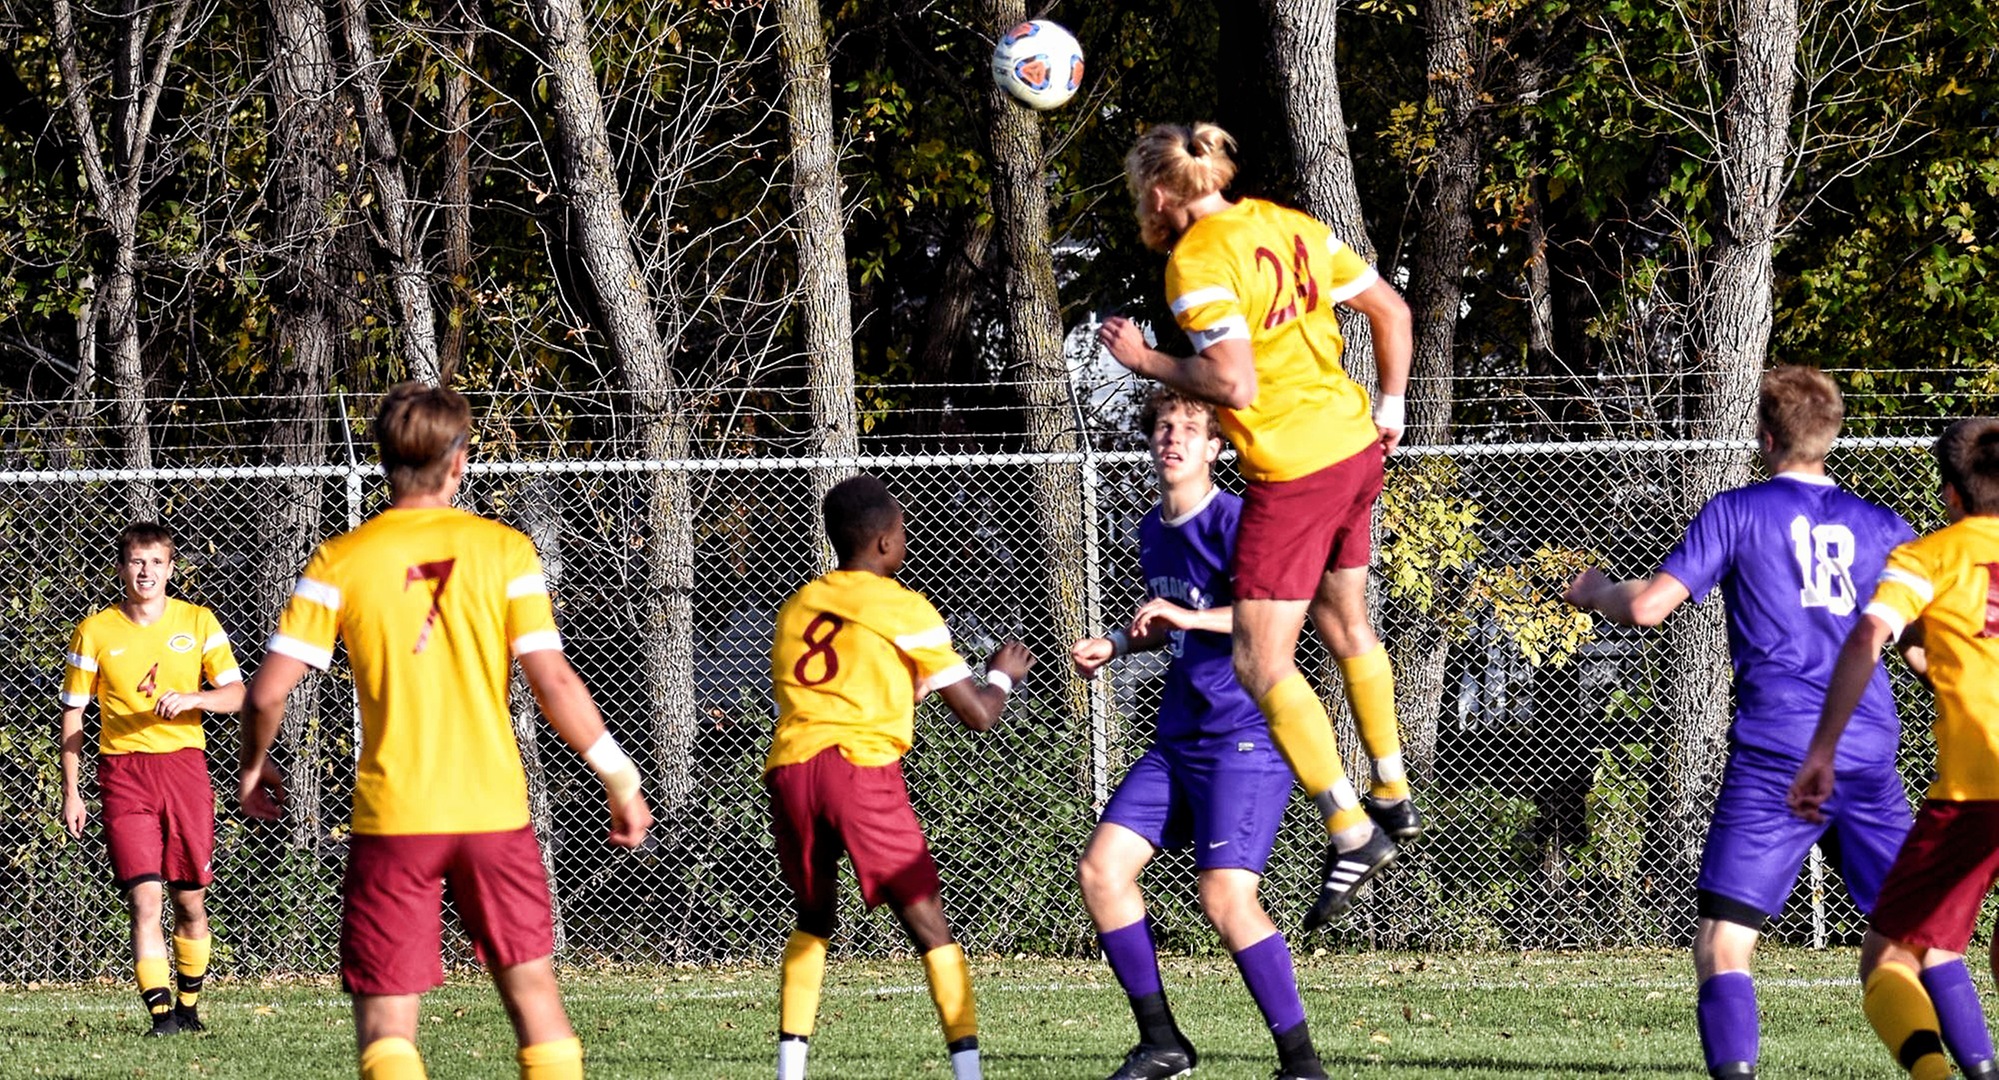 Junior Austin Peterson scored Concordia's lone goal on a header in the Cobbers' 1-1 2OT tie at St. Olaf.